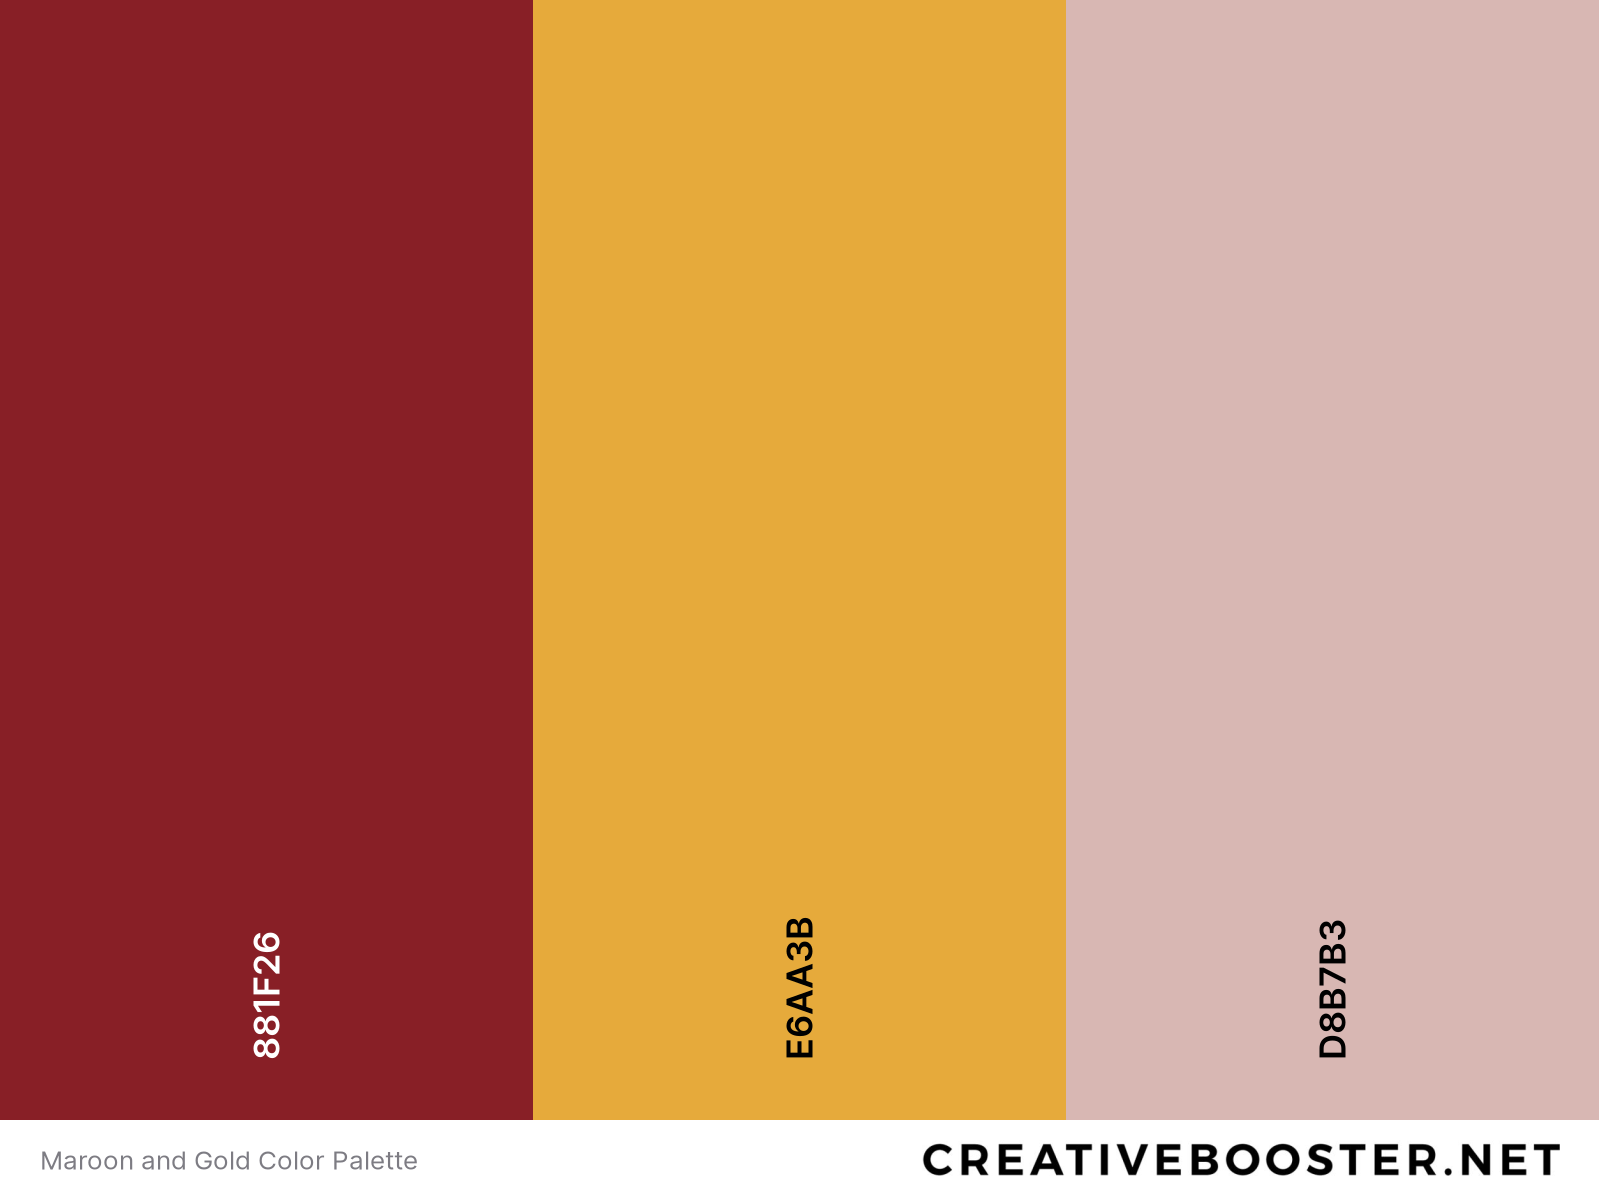 Maroon and Gold Color Palette